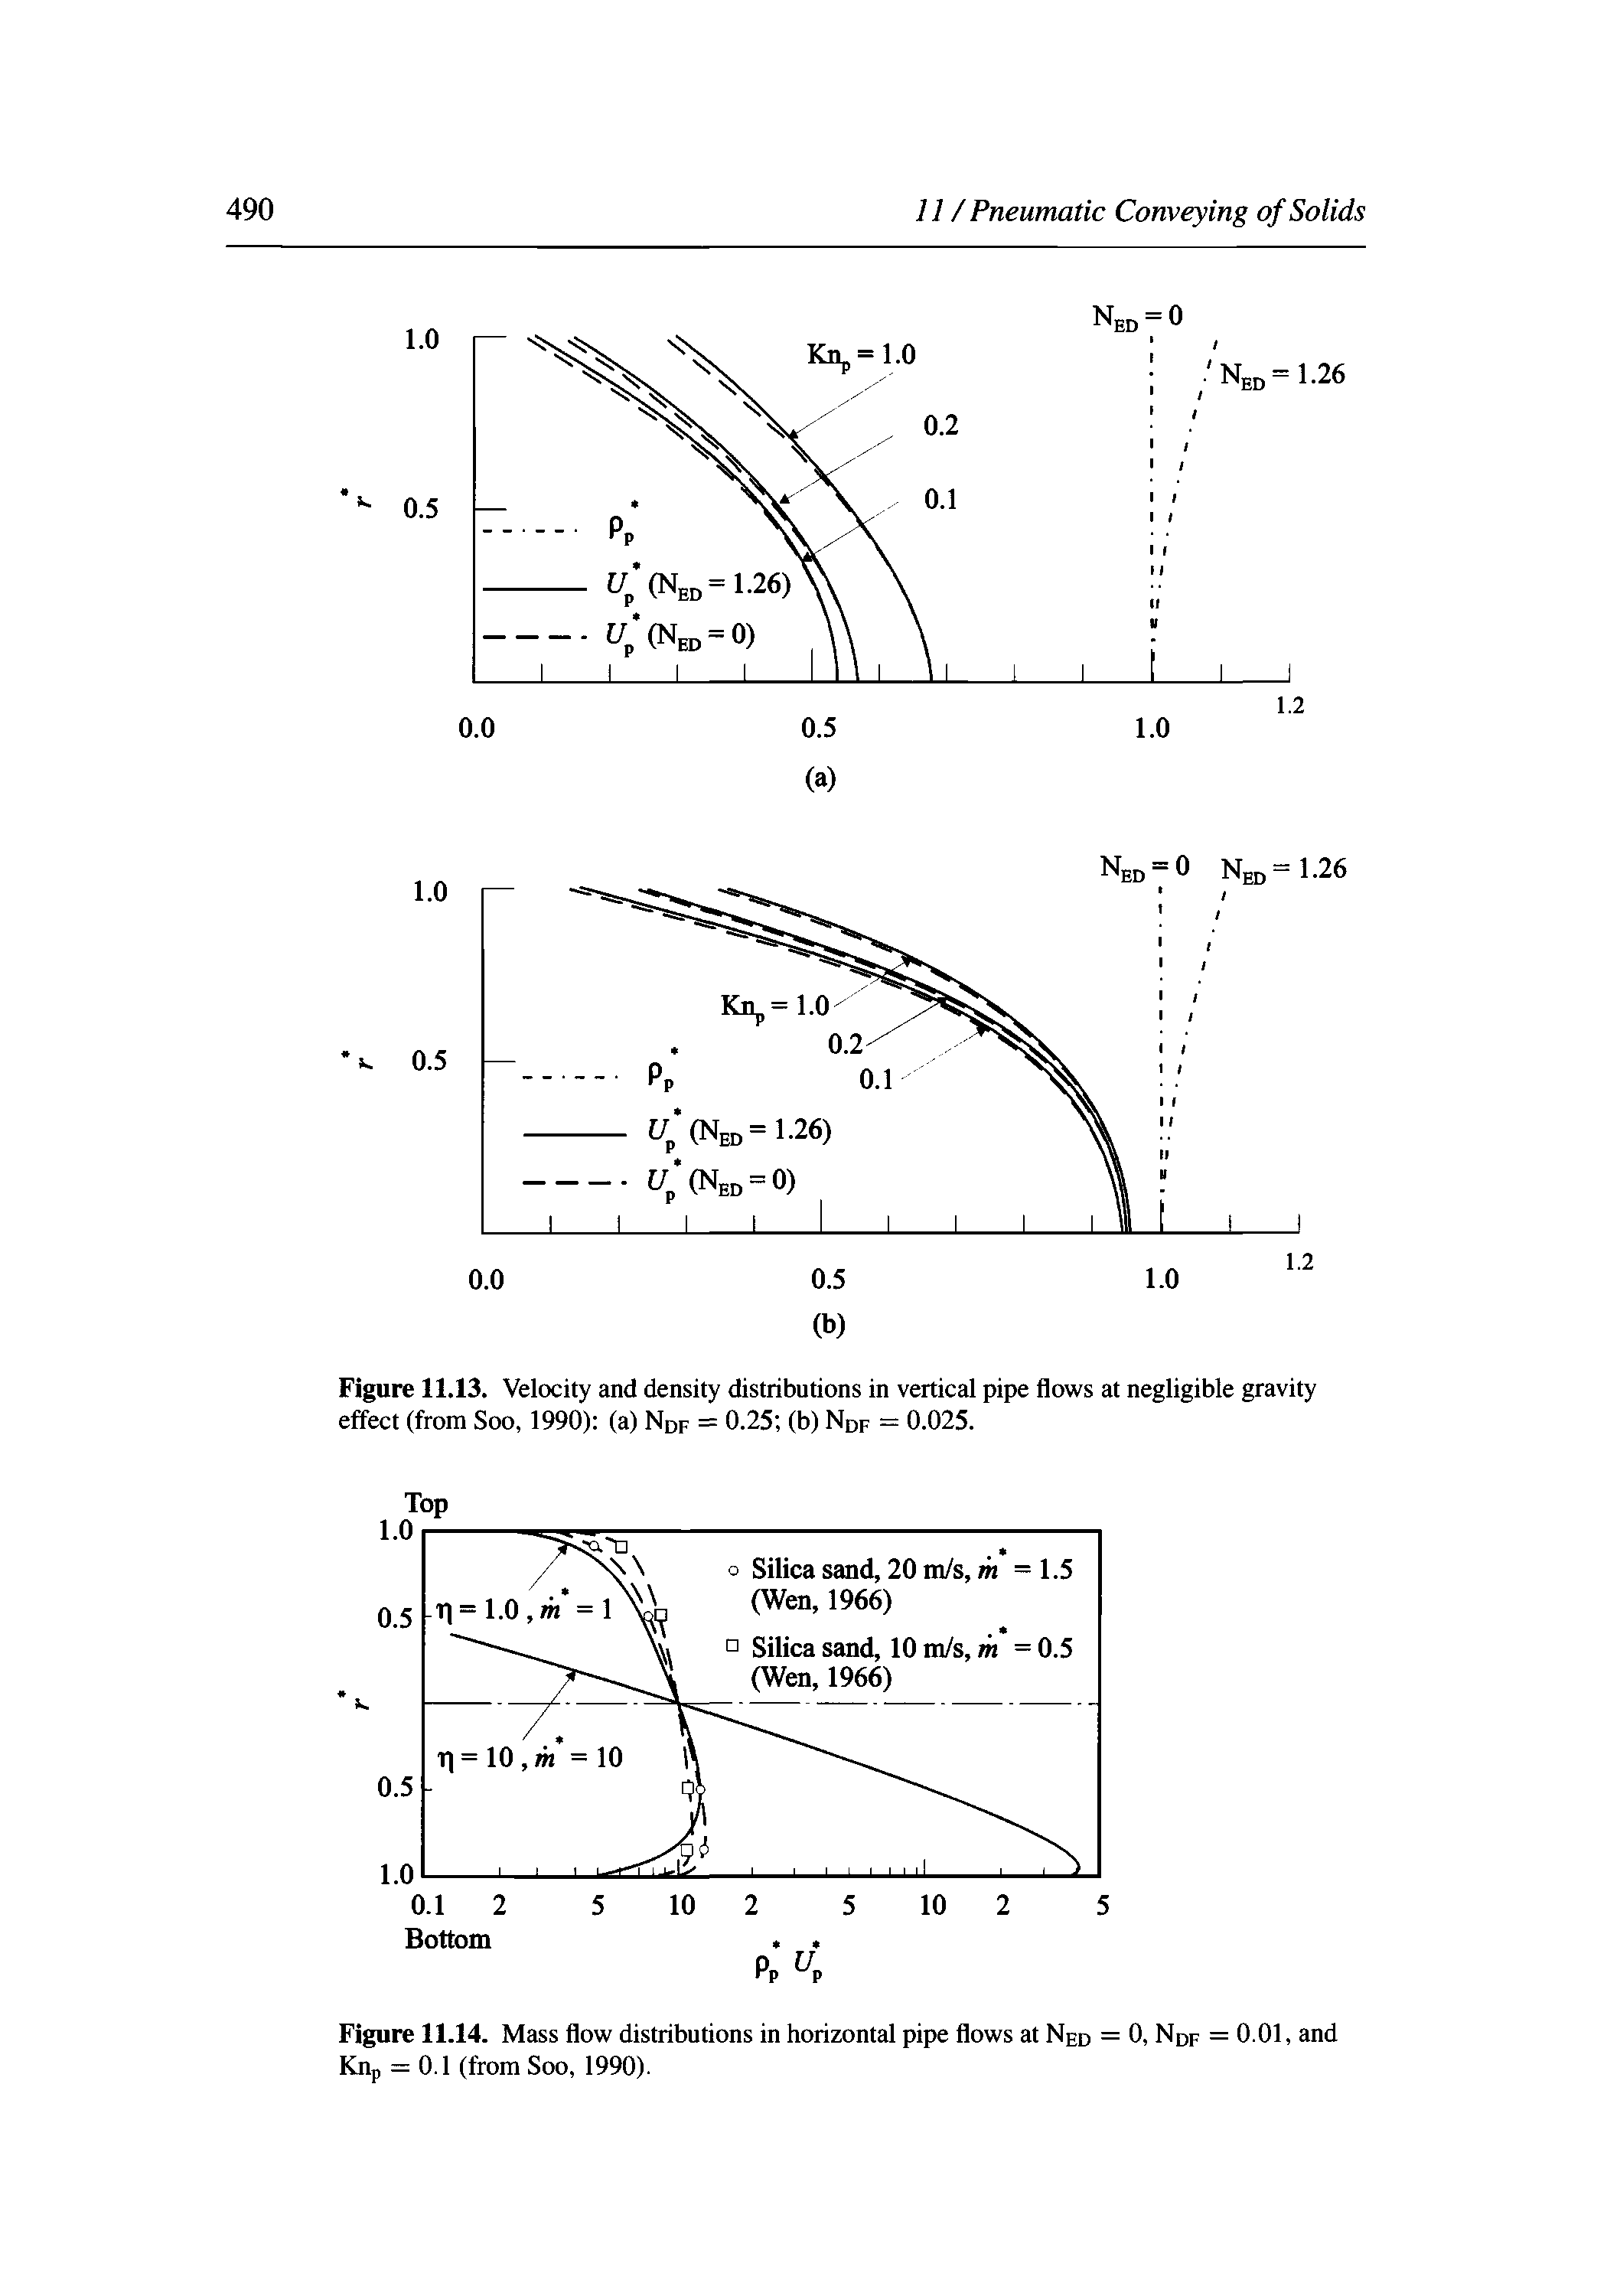 Figure 11.13. Velocity and density distributions in vertical pipe flows at negligible gravity effect (from Soo, 1990) (a) NDF = 0.25 (b) NDF = 0.025.